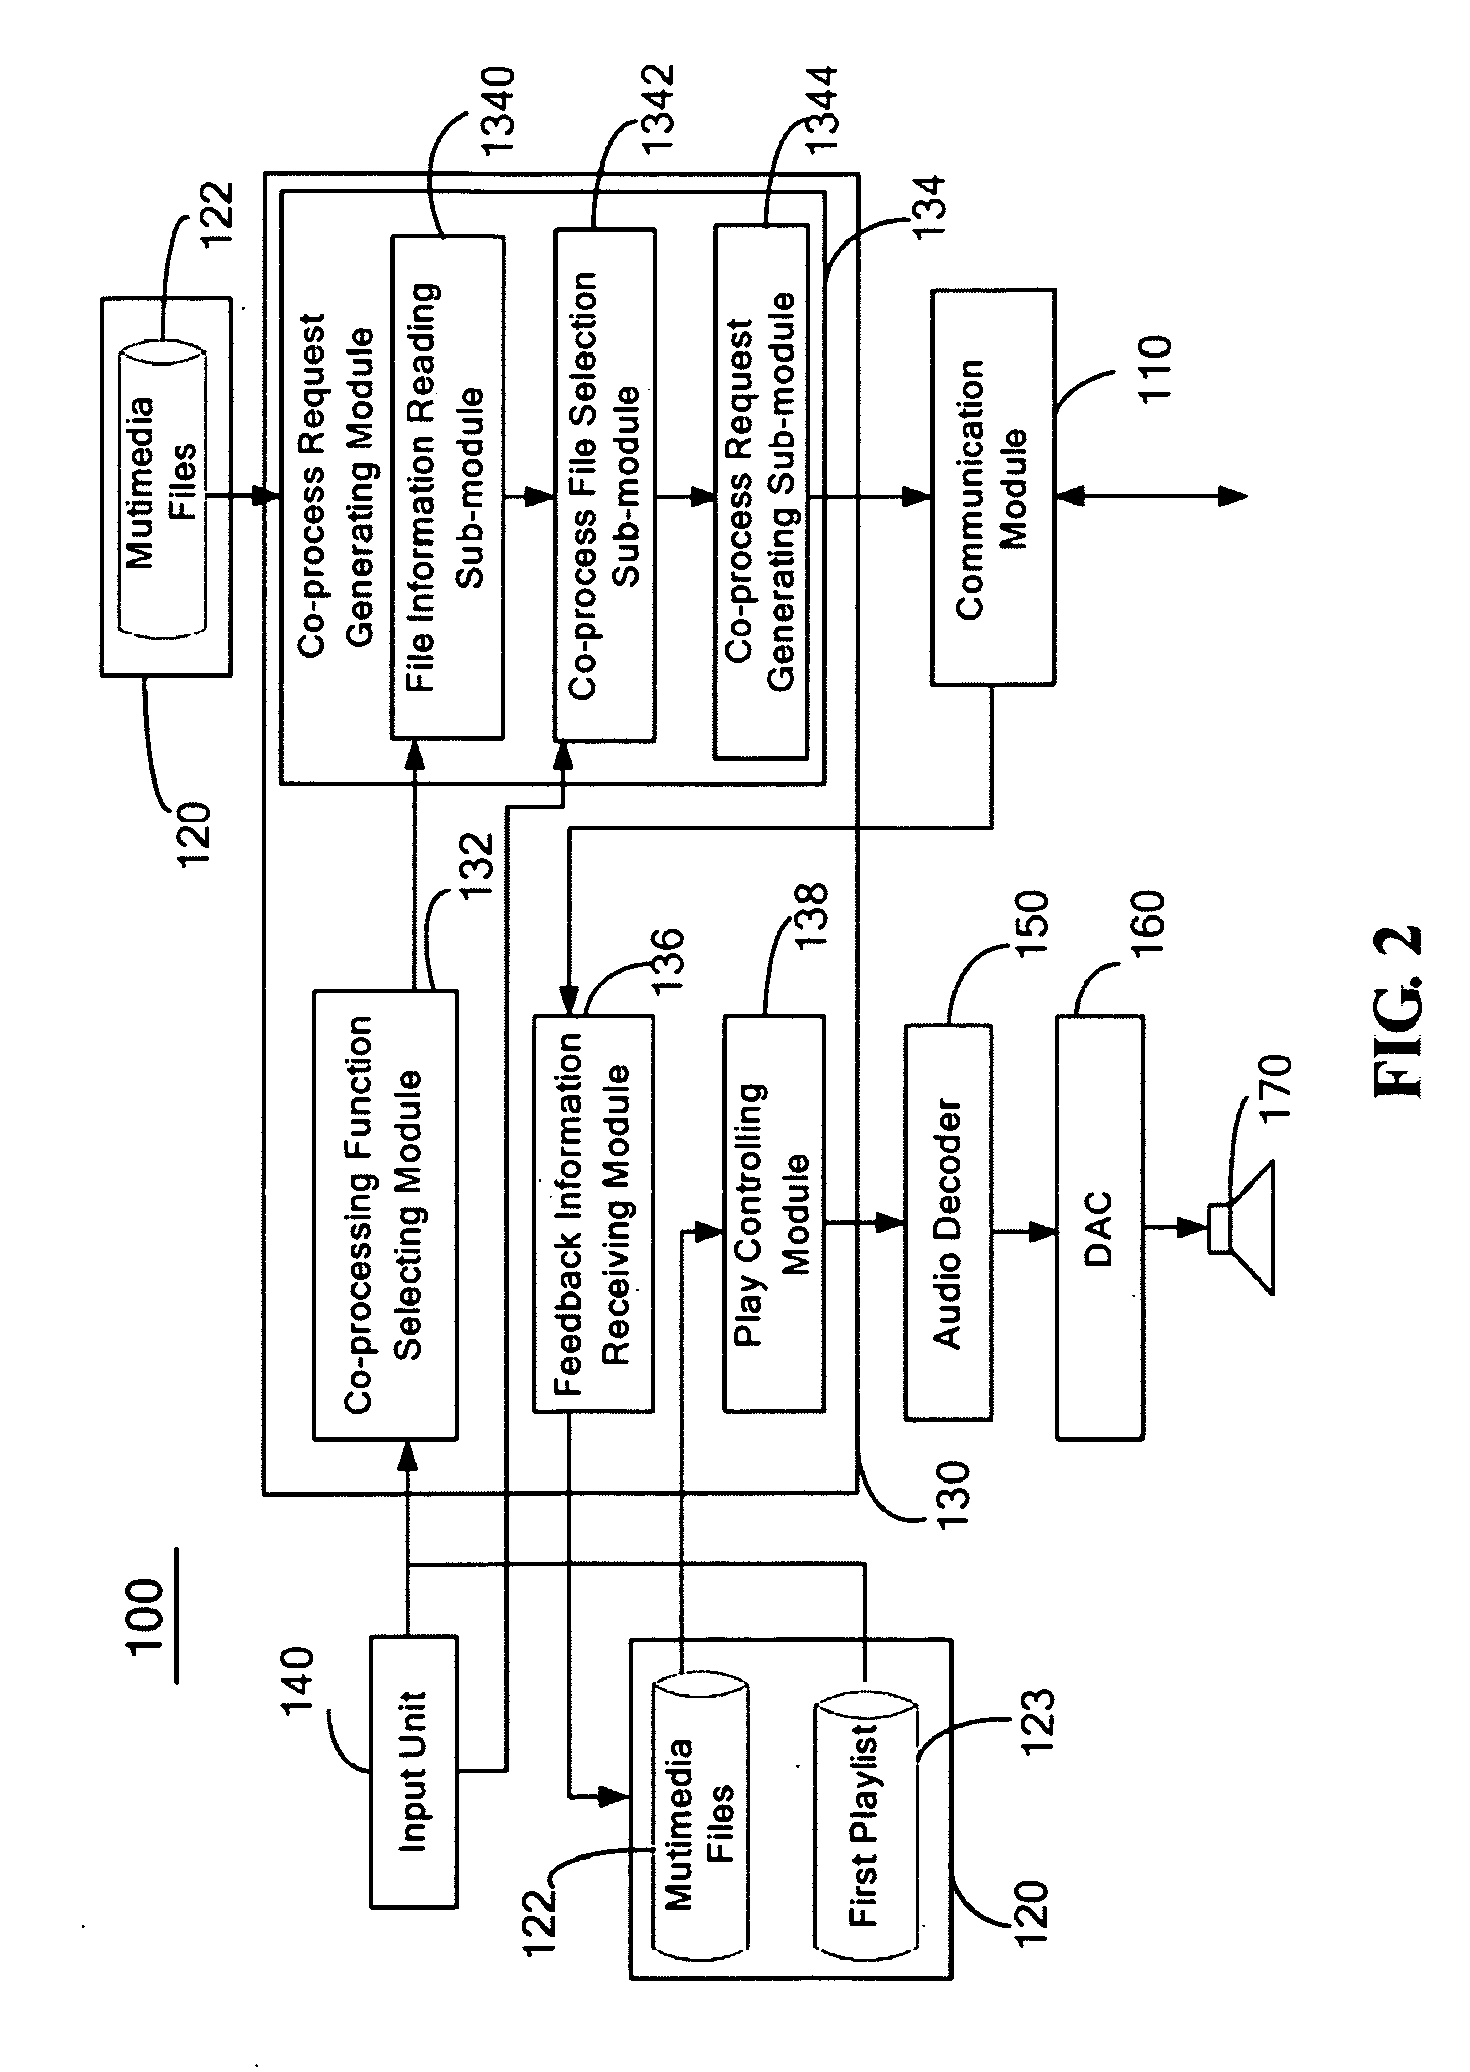 Multimedia file co-processing system and method